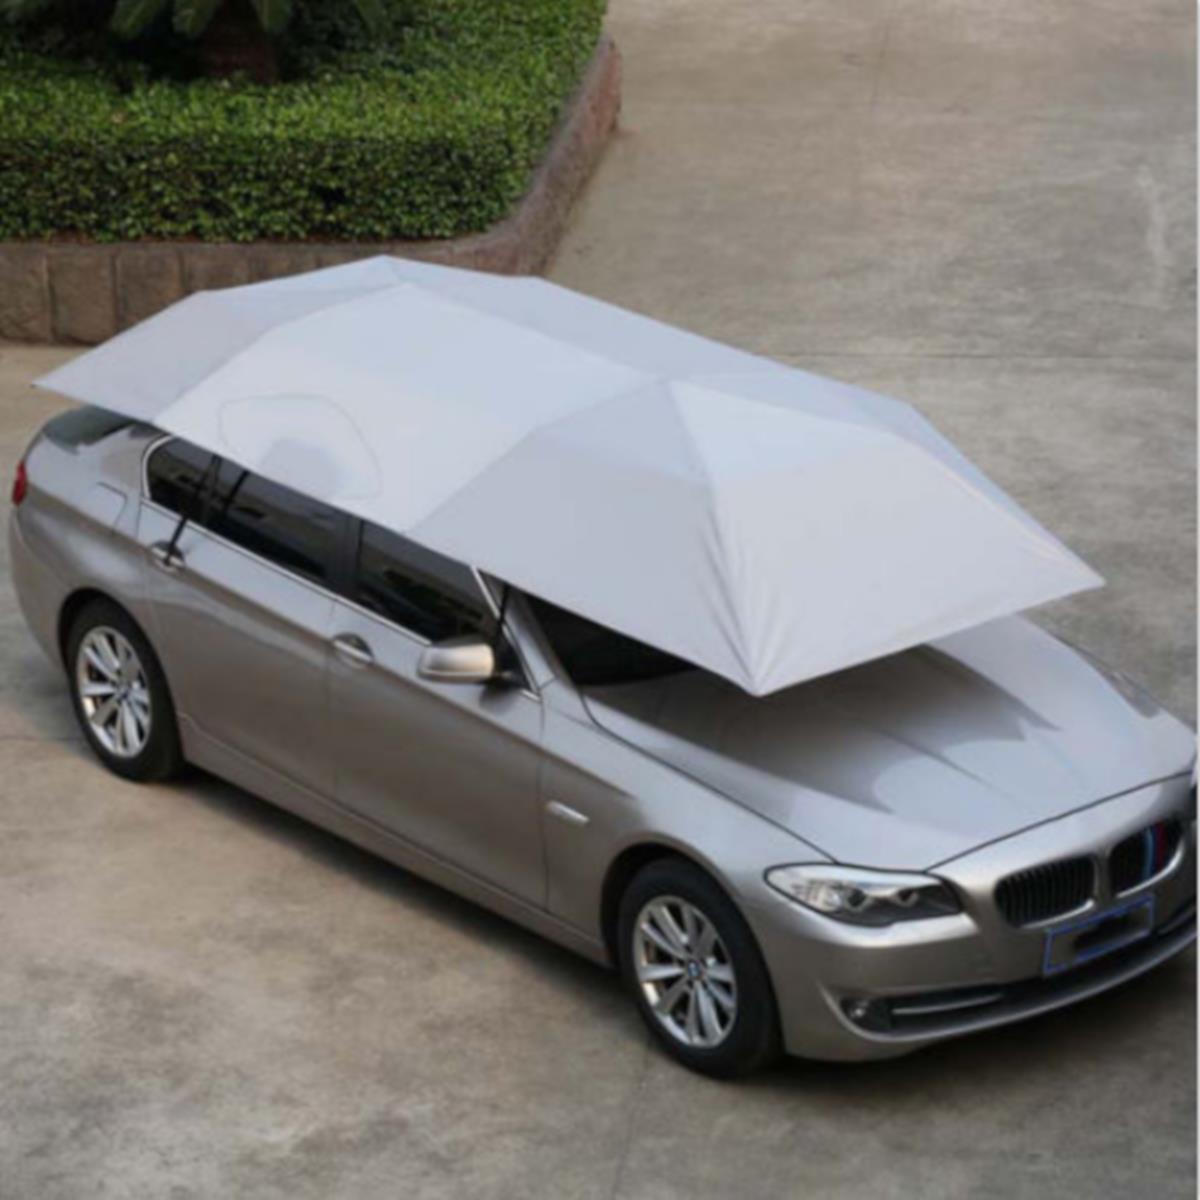 Gray Extra Large UV Oxford Cloth for Car Sun Shelter Umbrella Tent Roof Cover 4.5* 2.3M